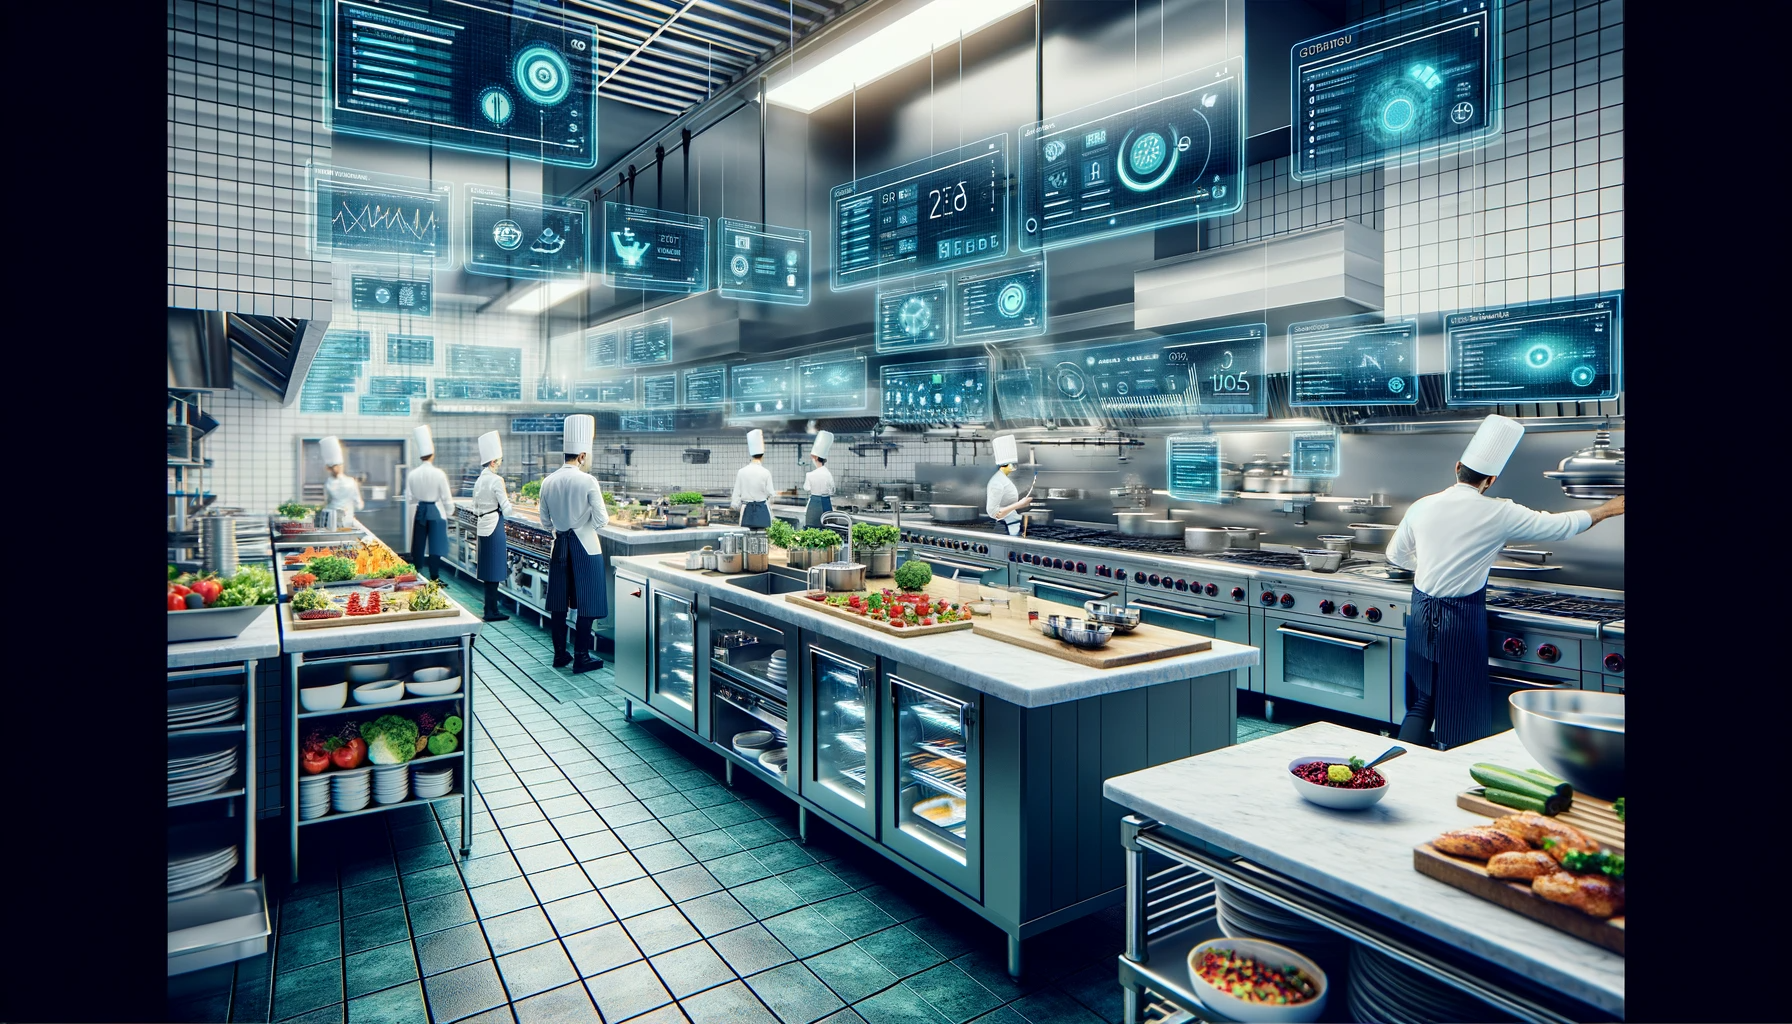 Food Production Kitchen with many digital features